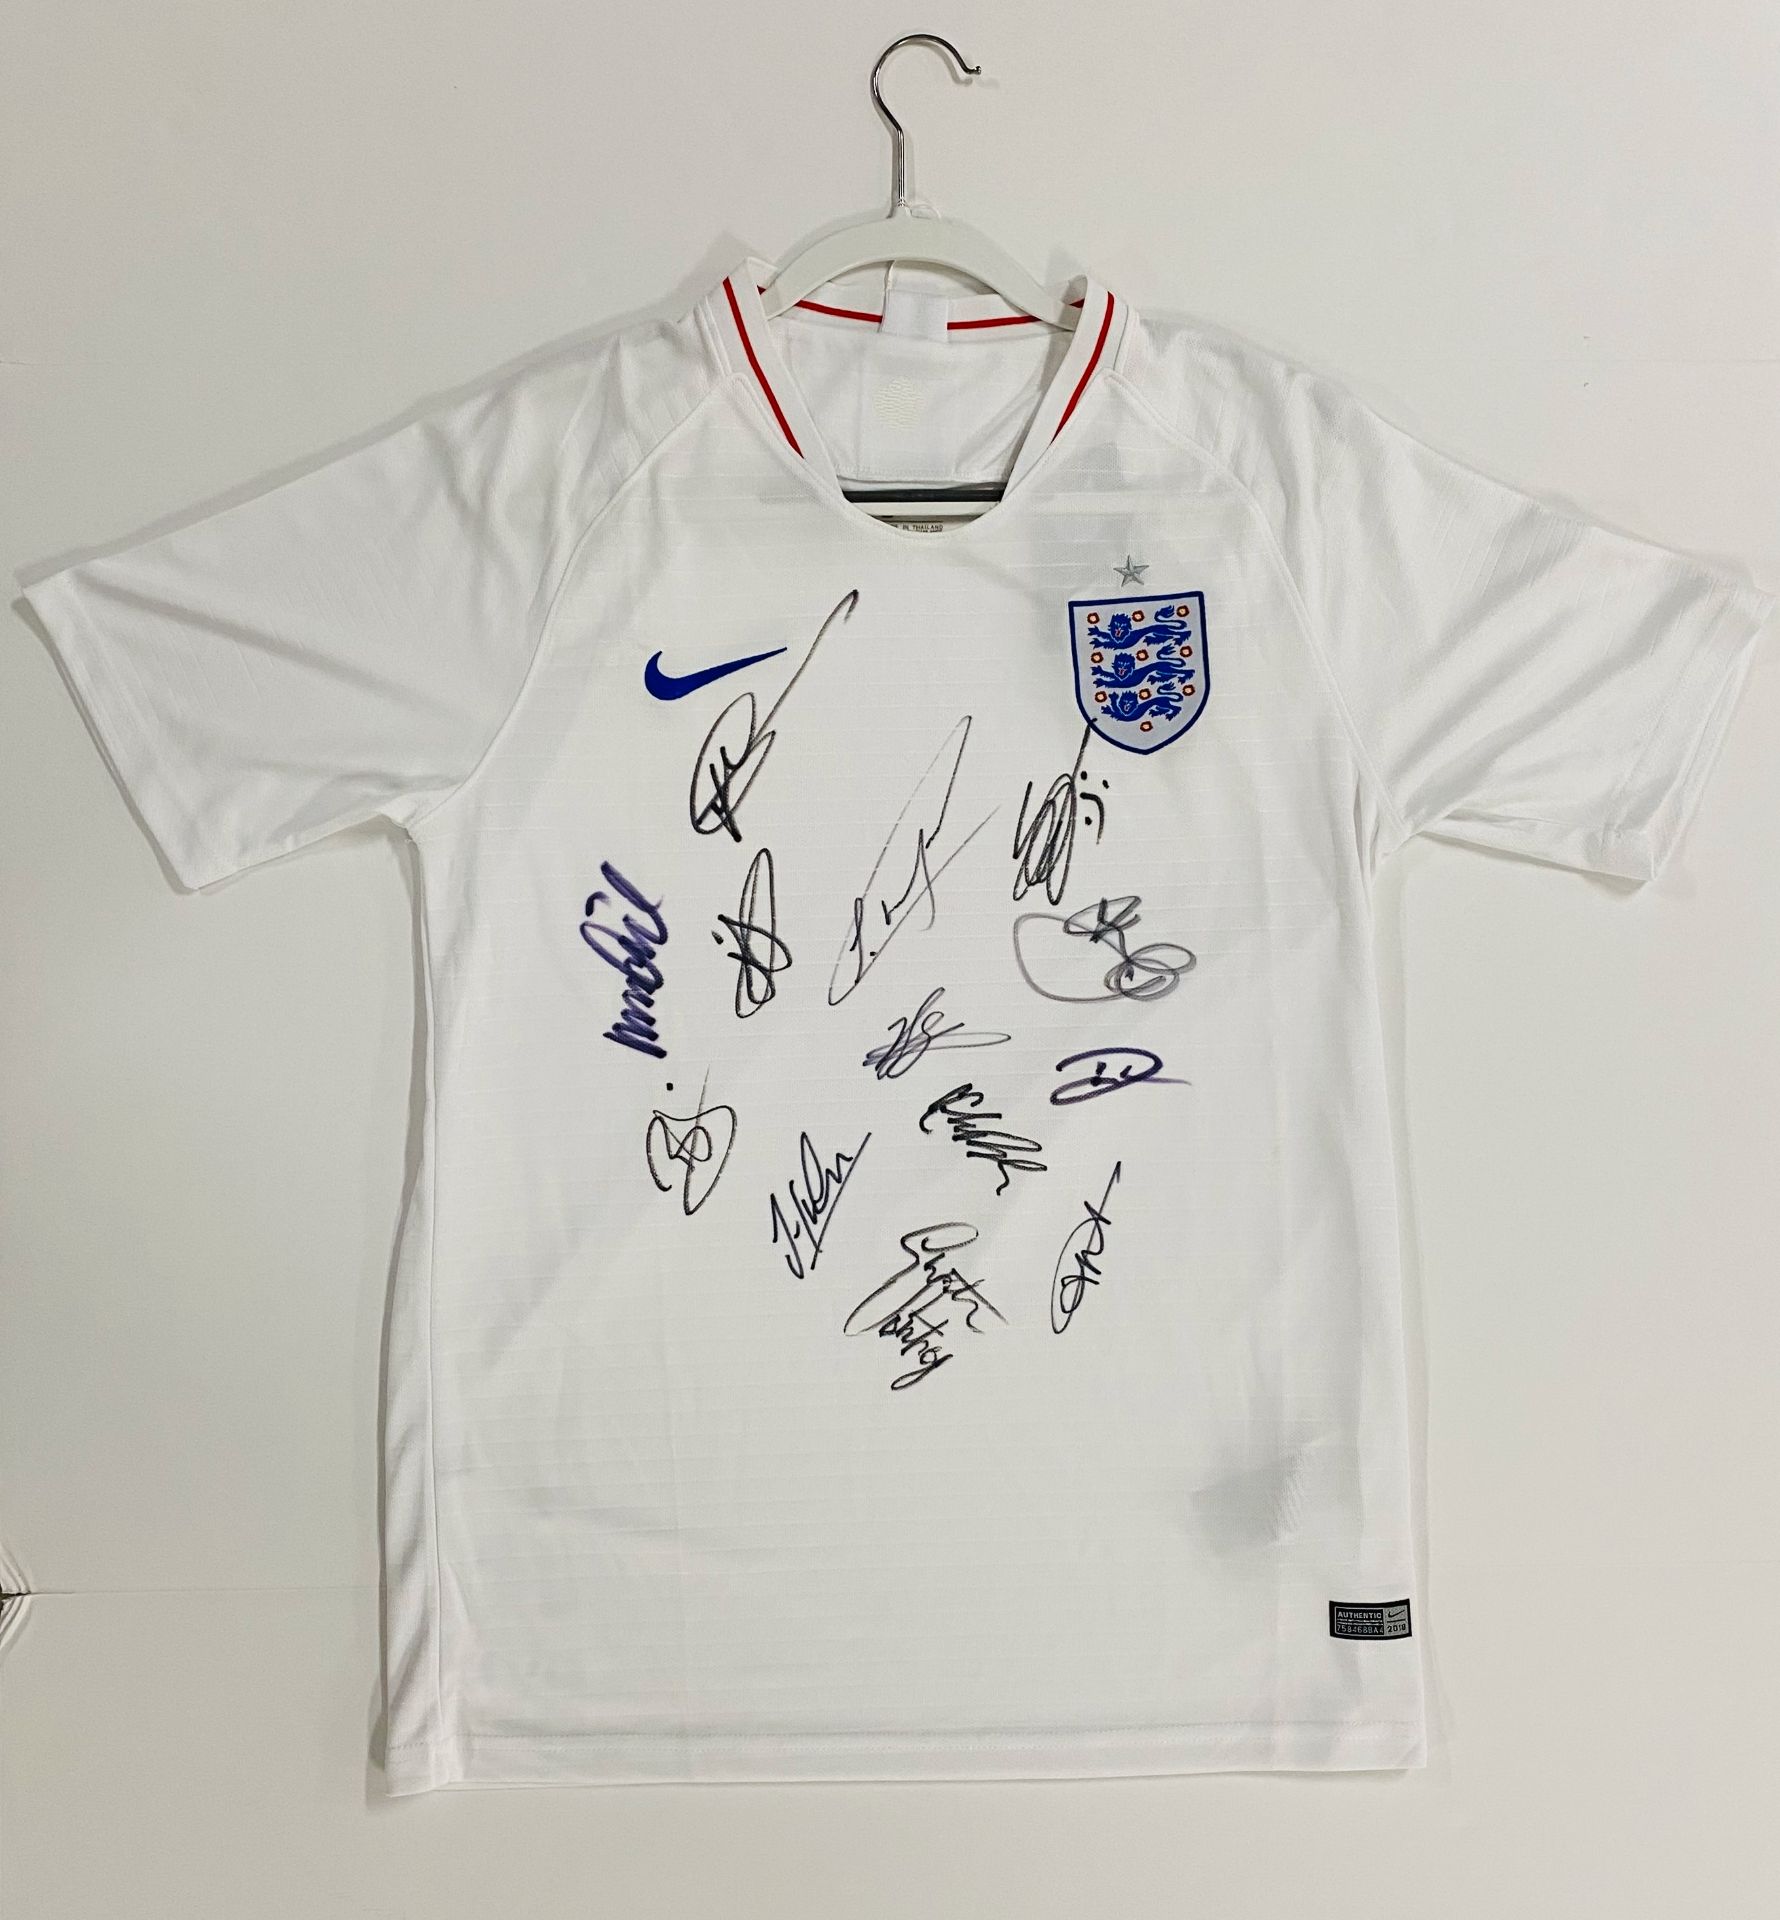 England 2018 World Cup signed jersey - Image 2 of 3